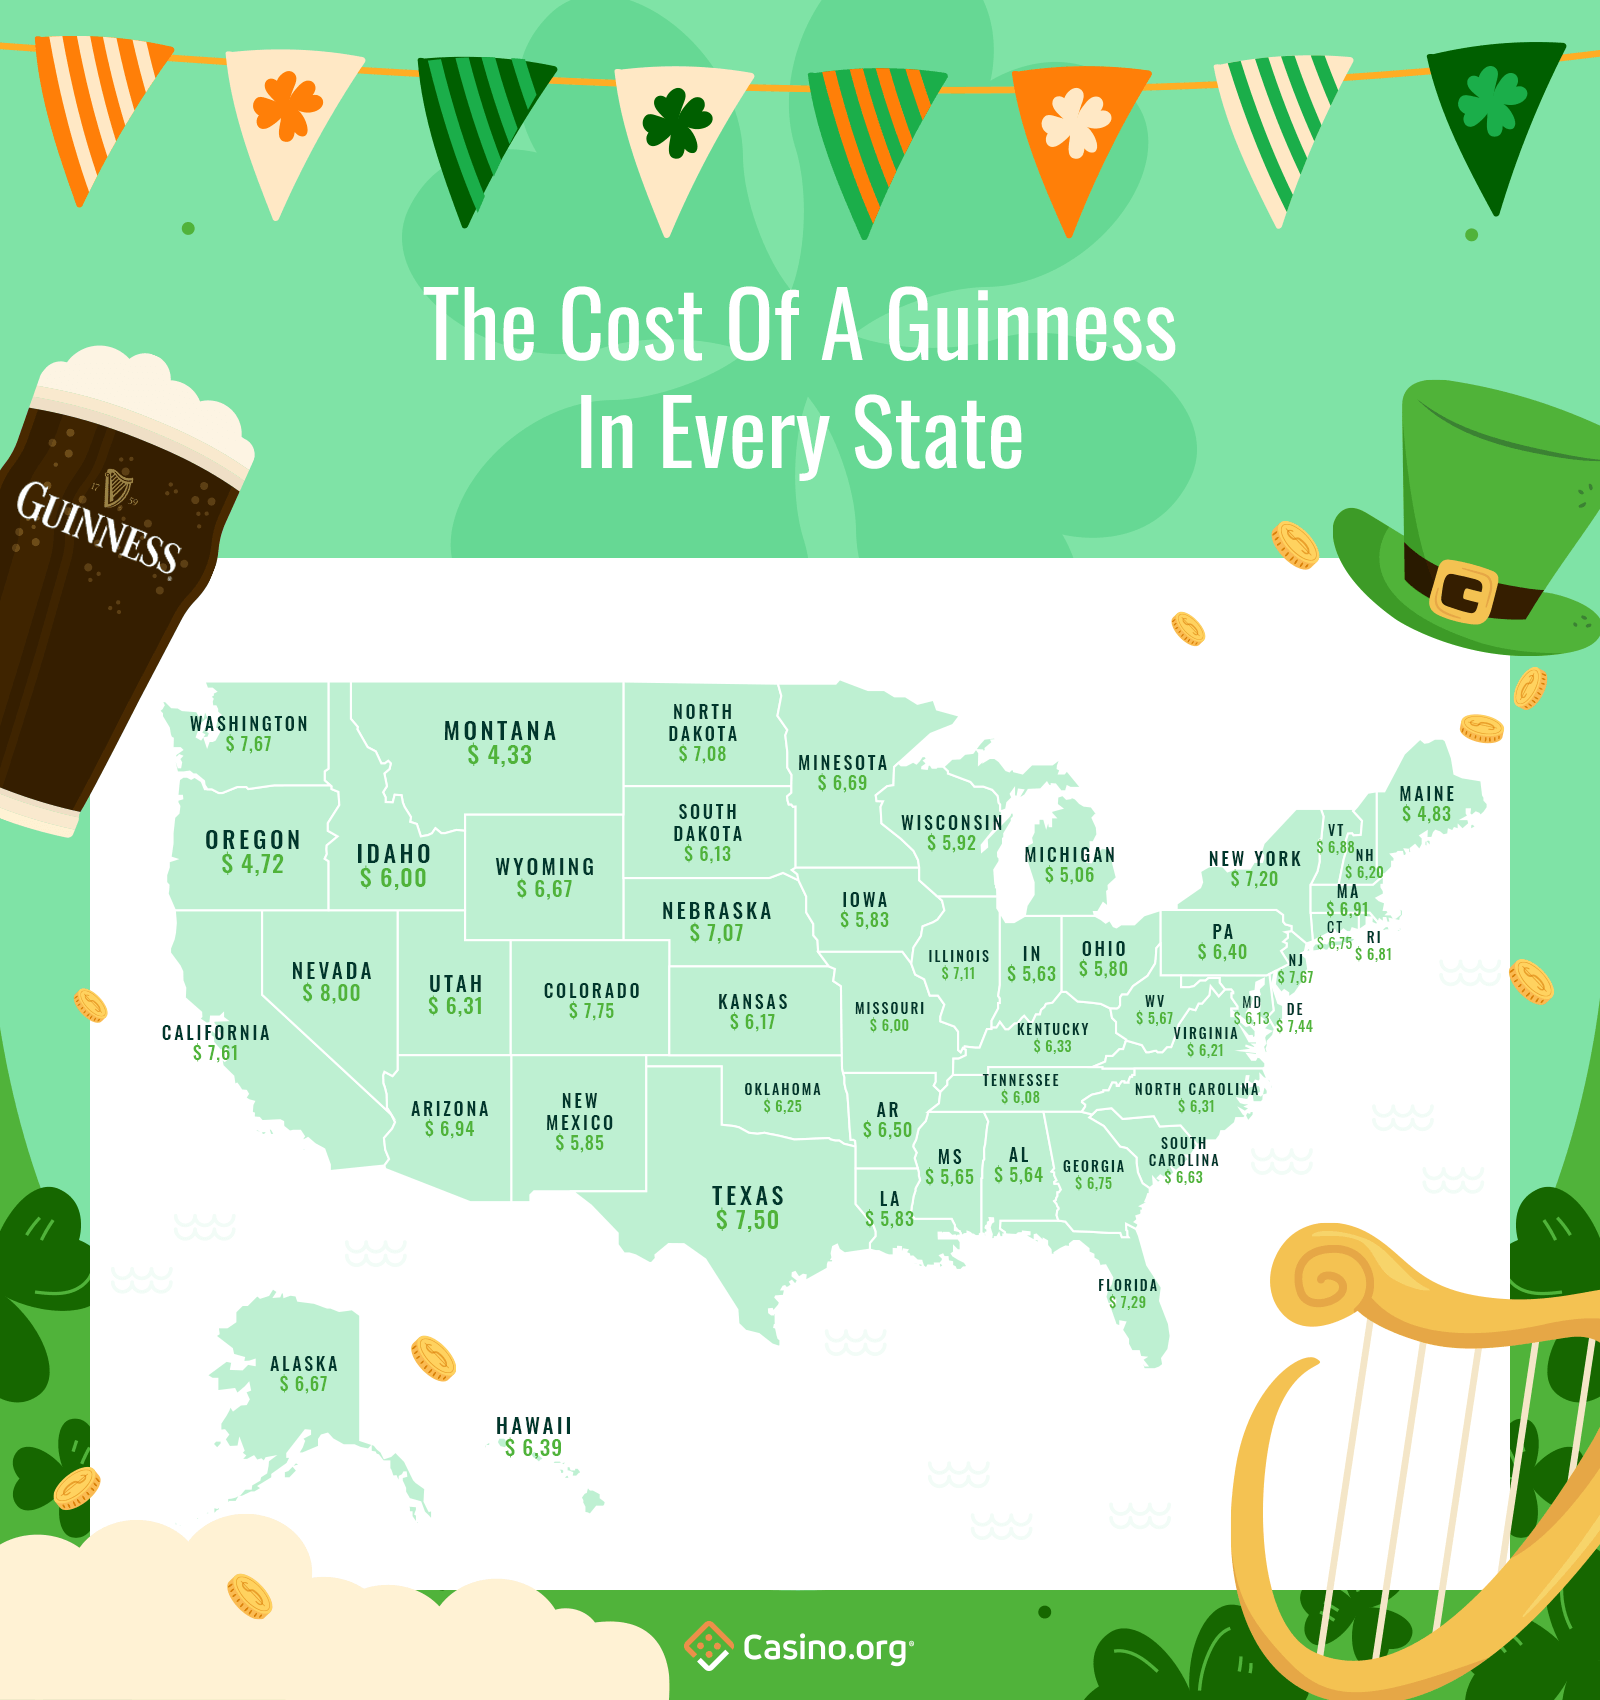 Infographic showing the average cost of a pint of guinness in every state